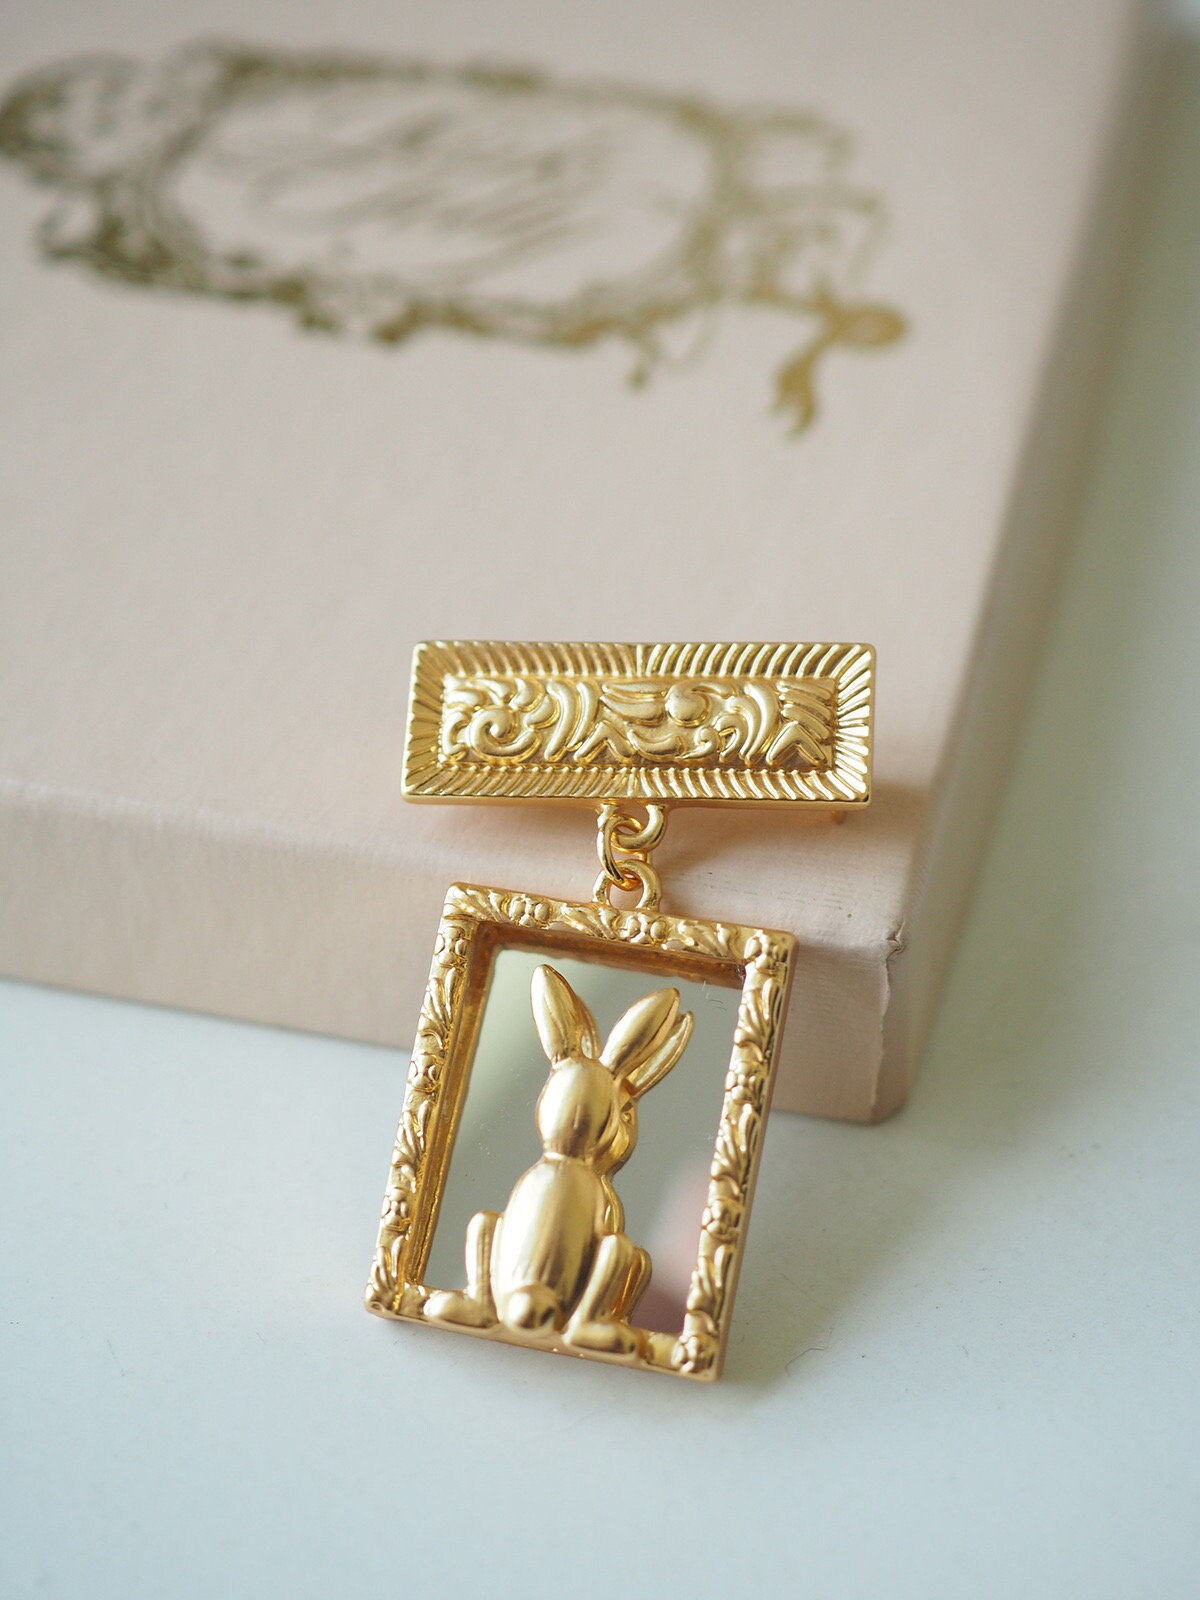 EUROPEAN VINTAGE 100% Authentic Genuine Rabbit with Mirror Brooch in Gold, 1990's